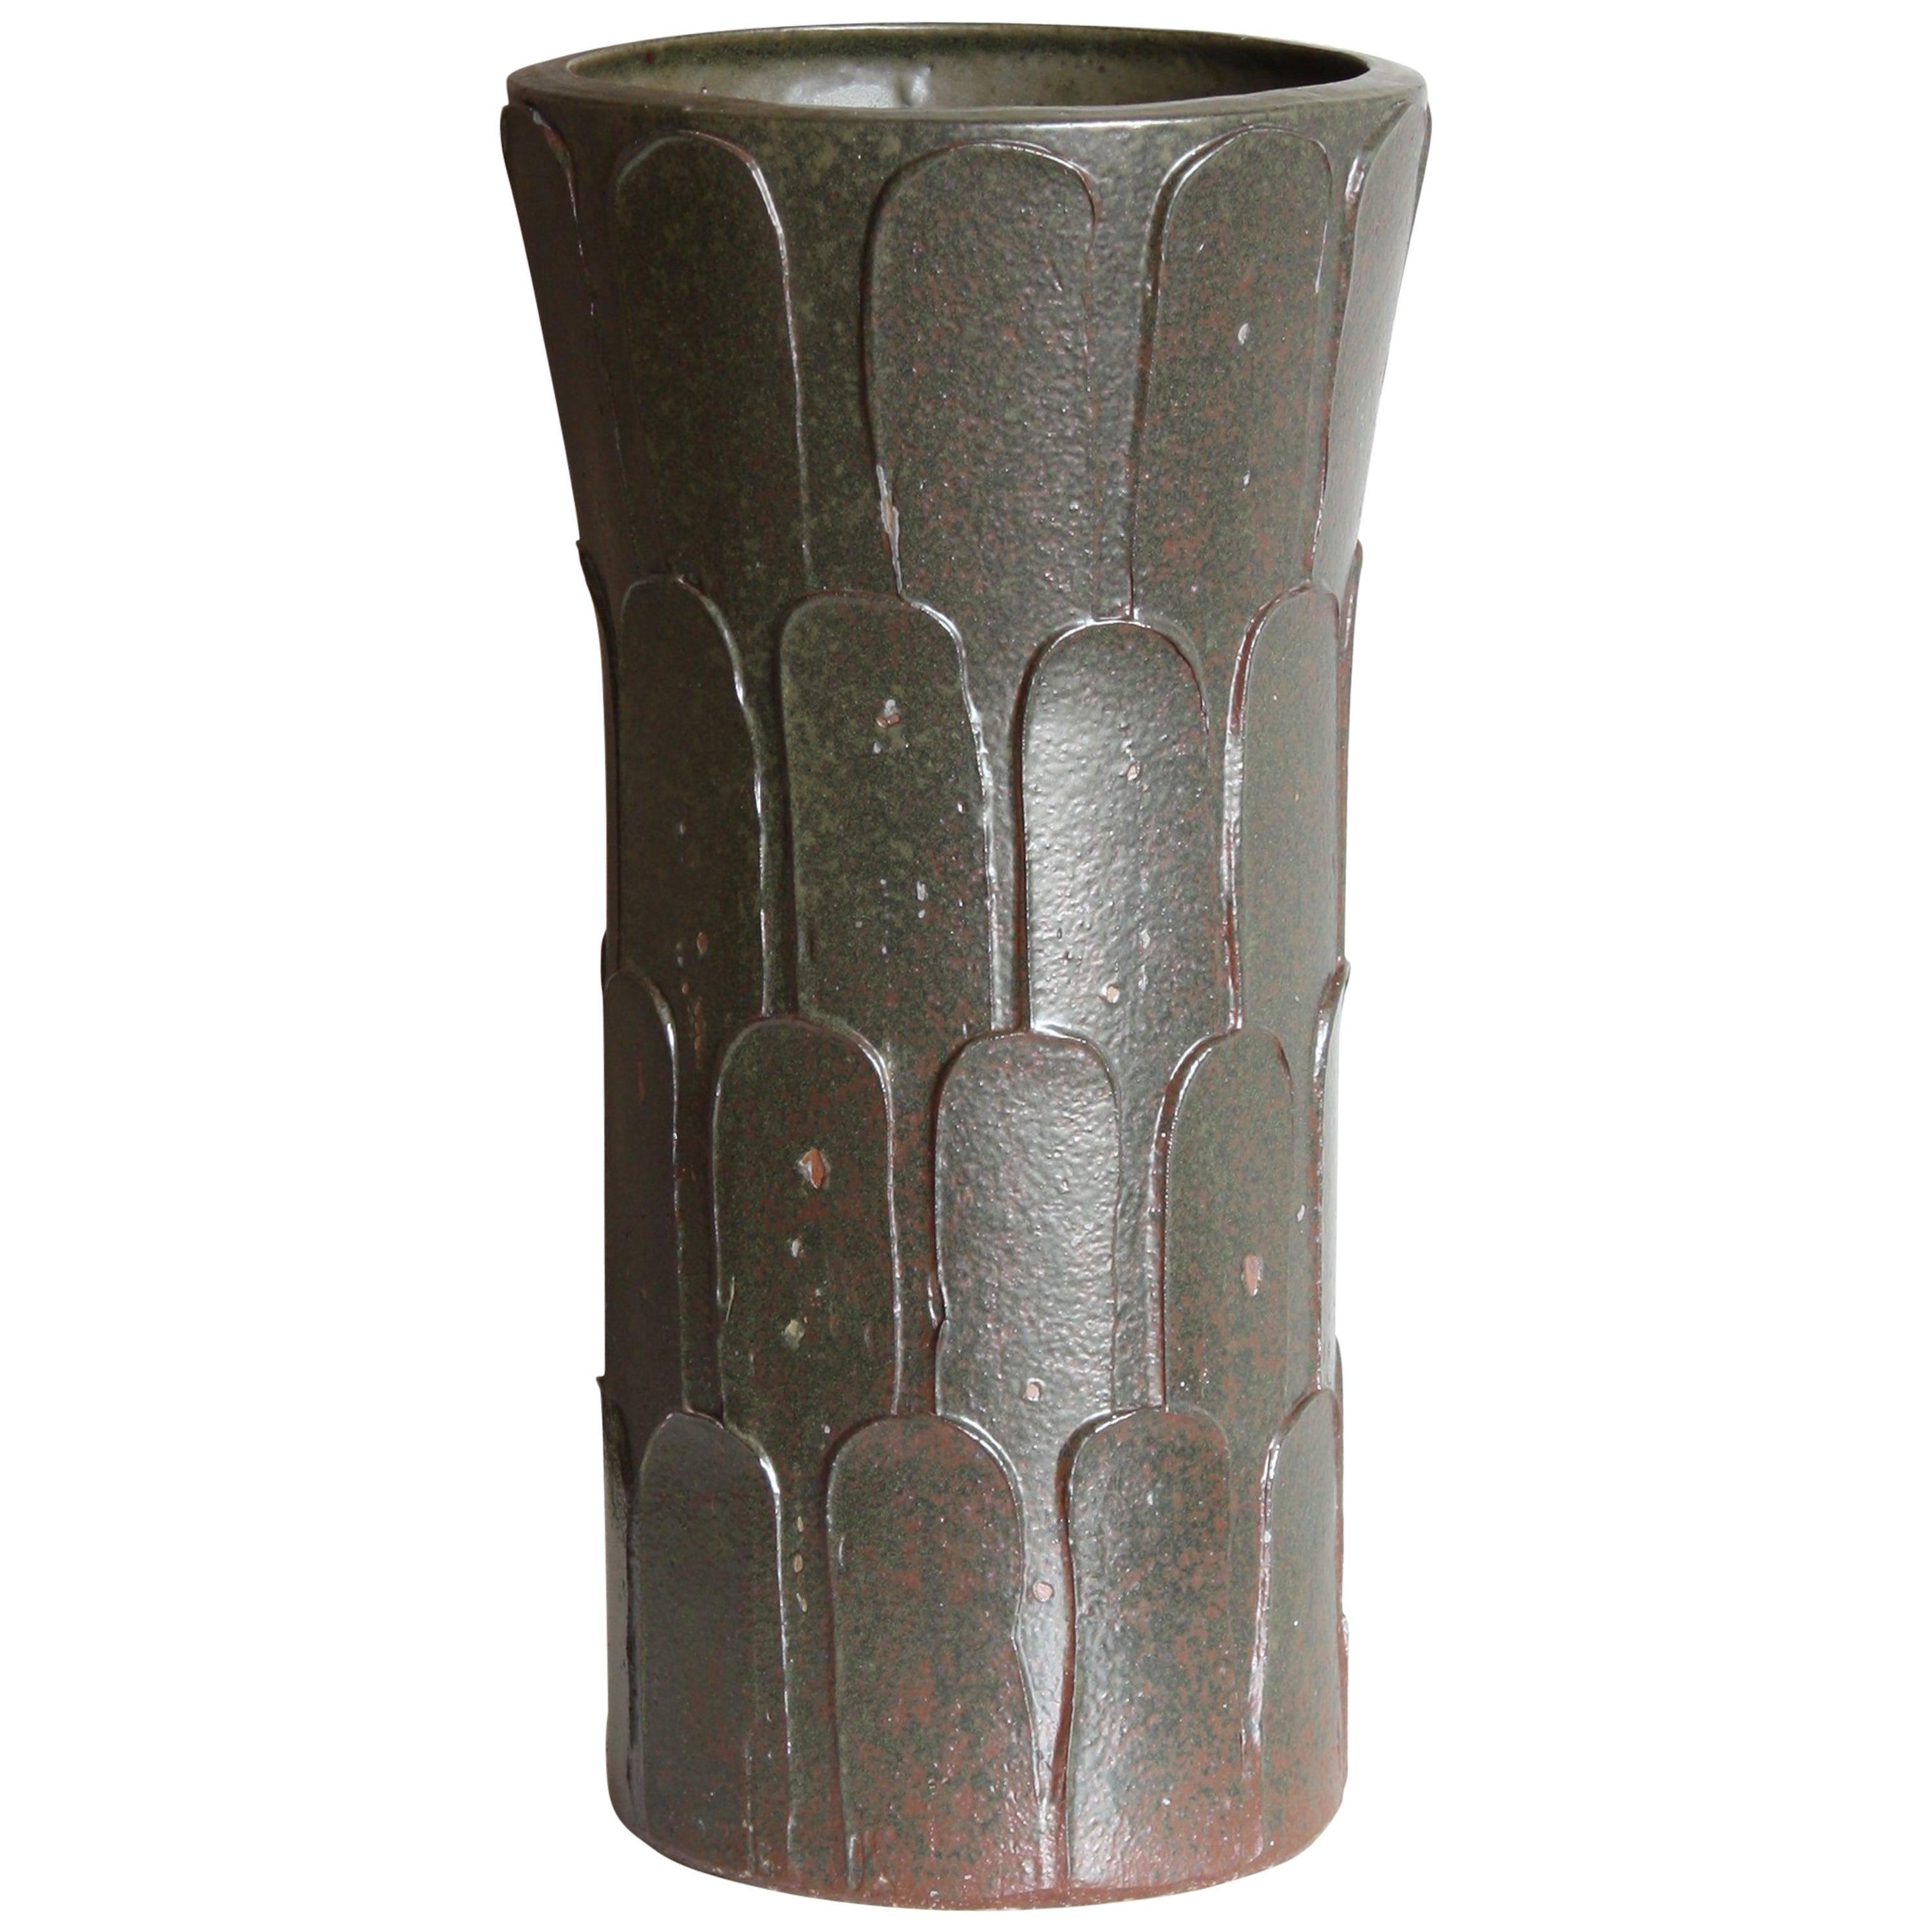 Umbrella Stand or Pot by David Cressey for Architectural Pottery